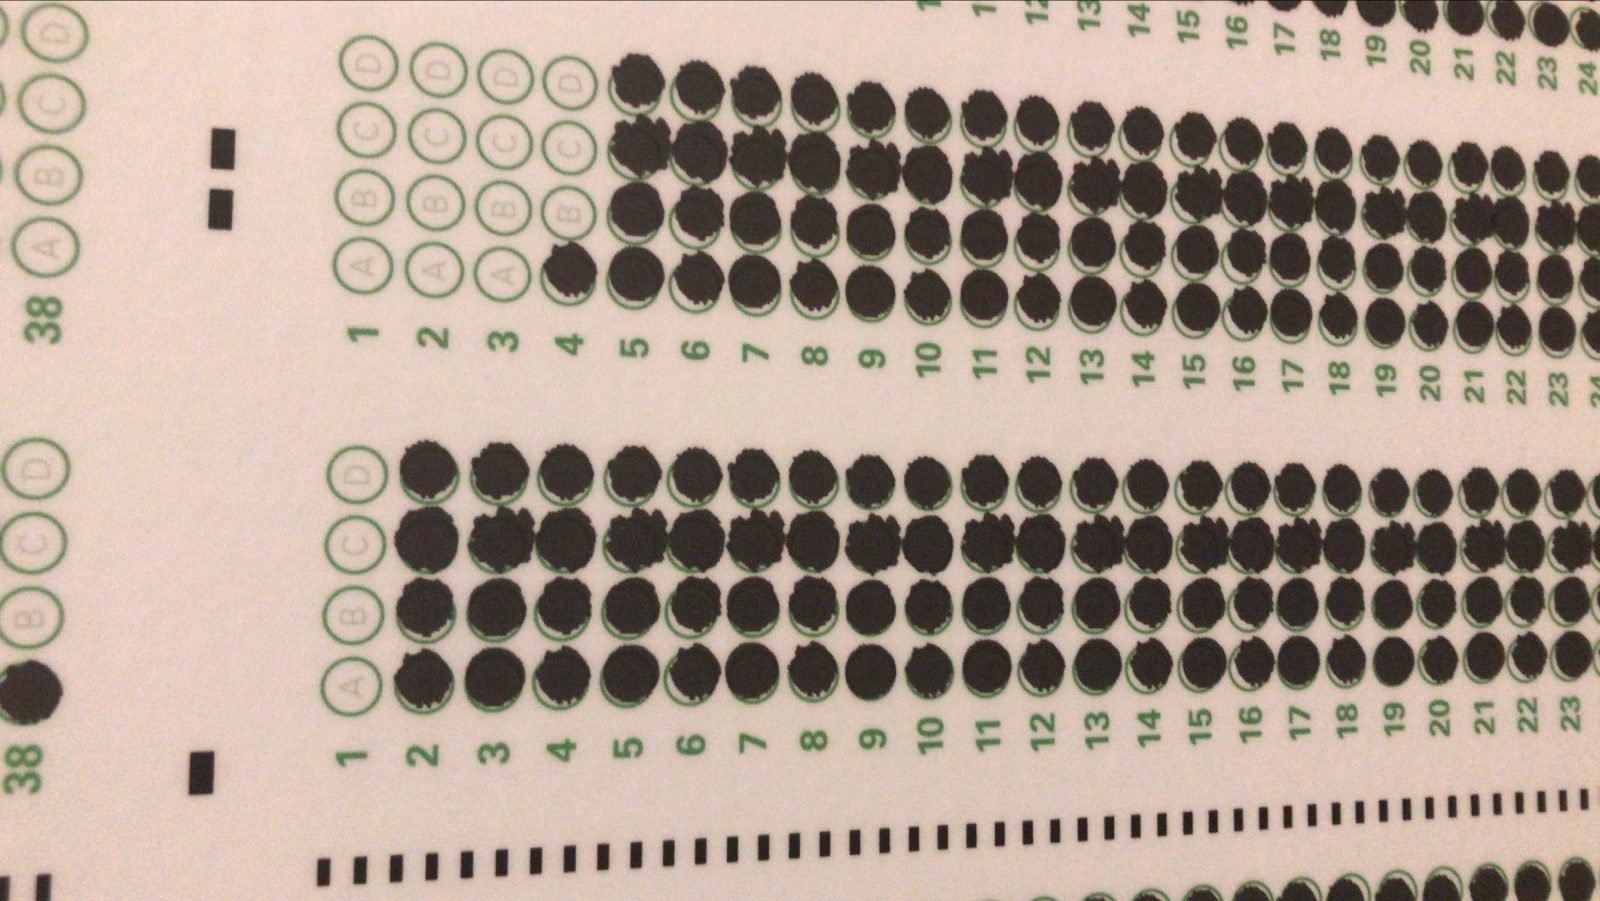 A horizontal testing scantron with almost all of the bubbles filled in